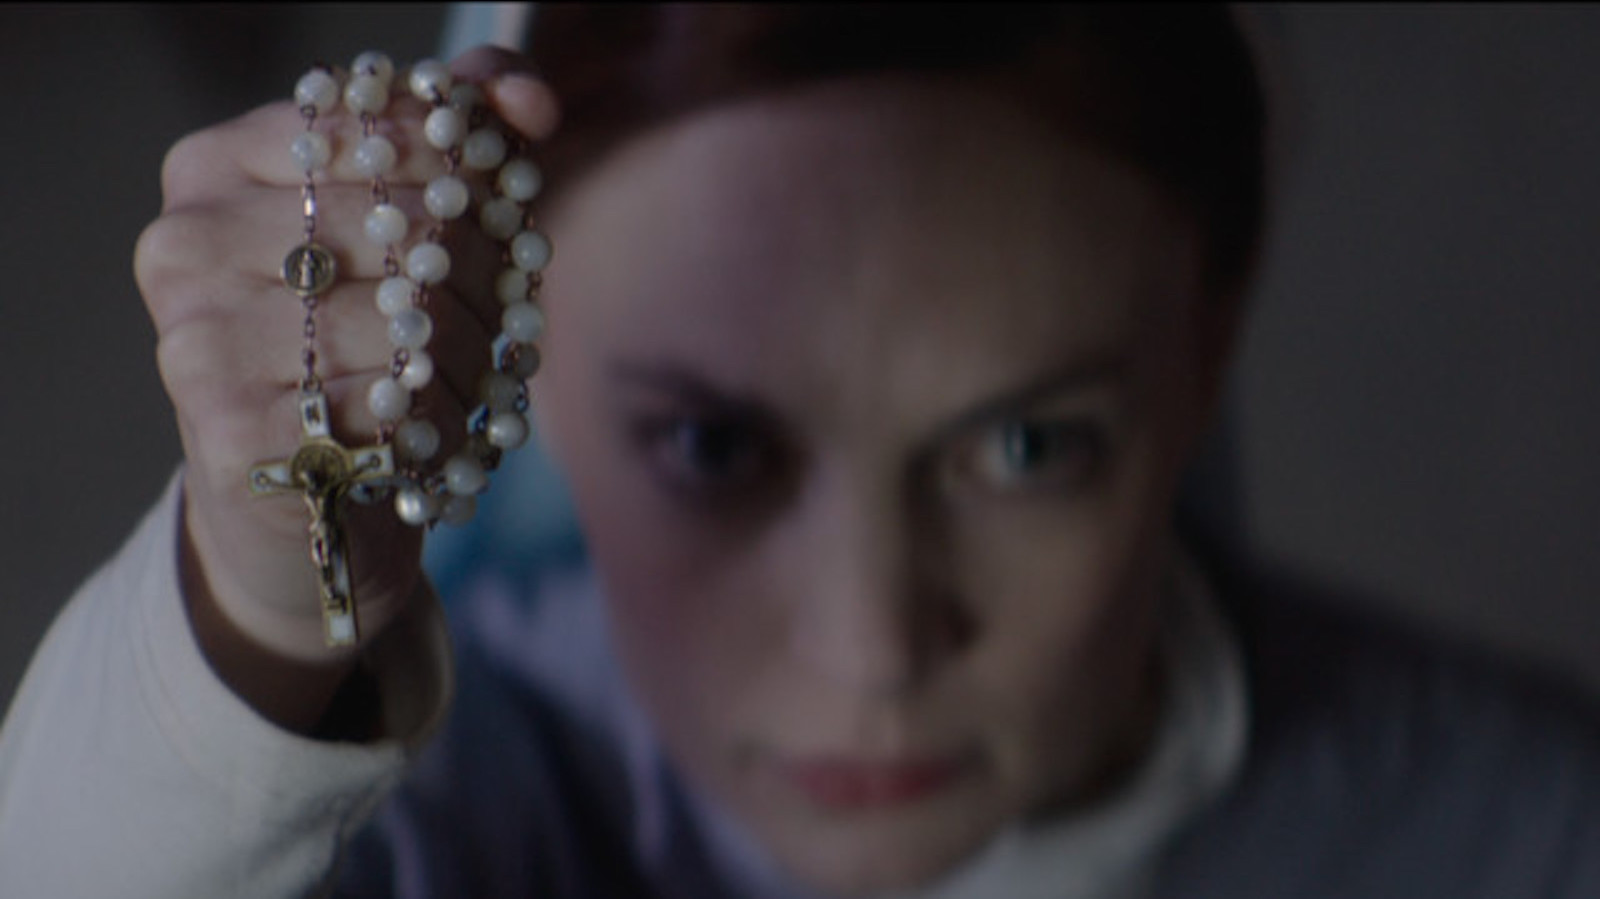 A woman holds up a pearly necklace towards the camera in close-up, her face blurred and out of focus